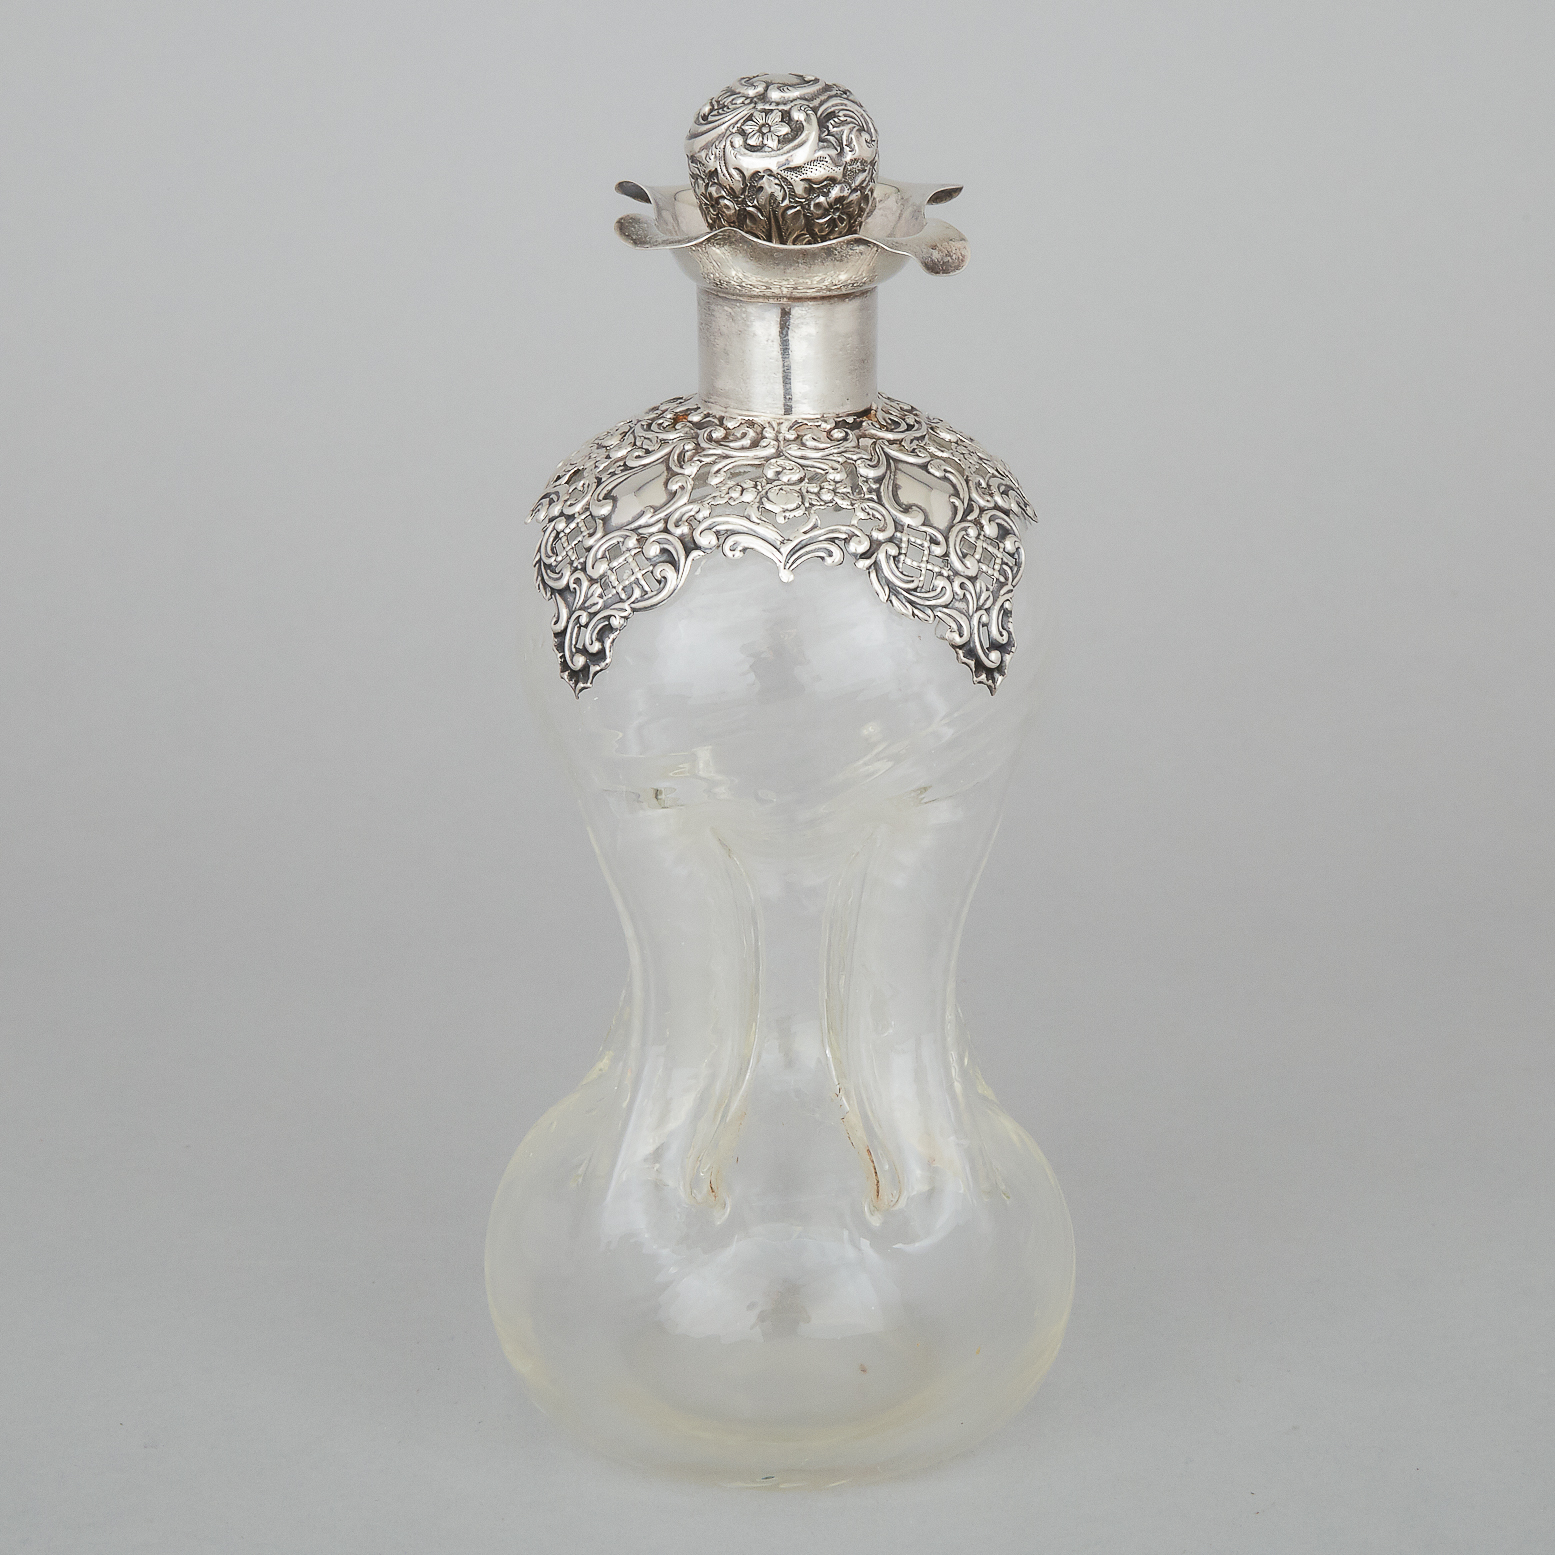 Edwardian Silver Mounted Glass Decanter, H.V. Pithey & Co., Birmingham, 1906